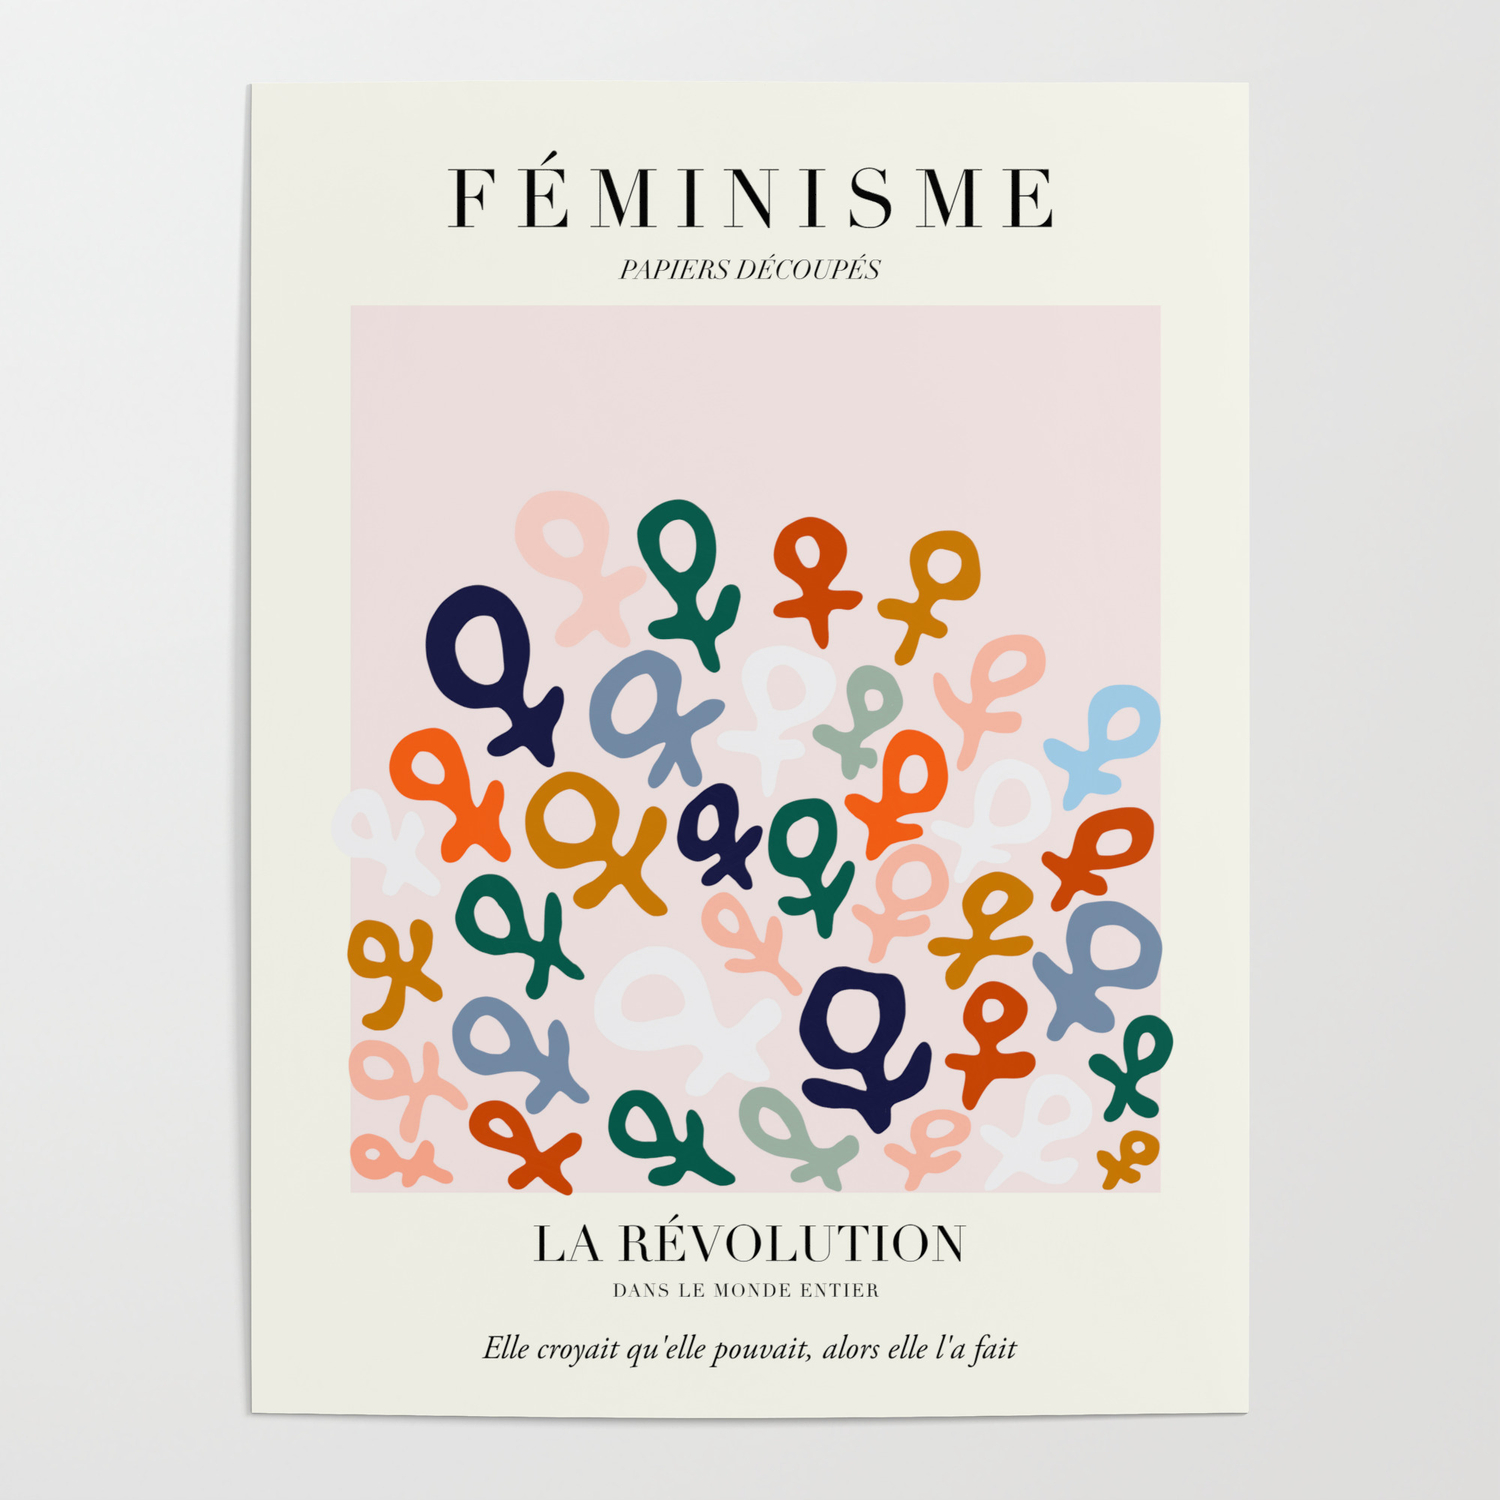 Details about   Dufau La Fronde Feminist Magazine Cover Framed Wall Art Poster 